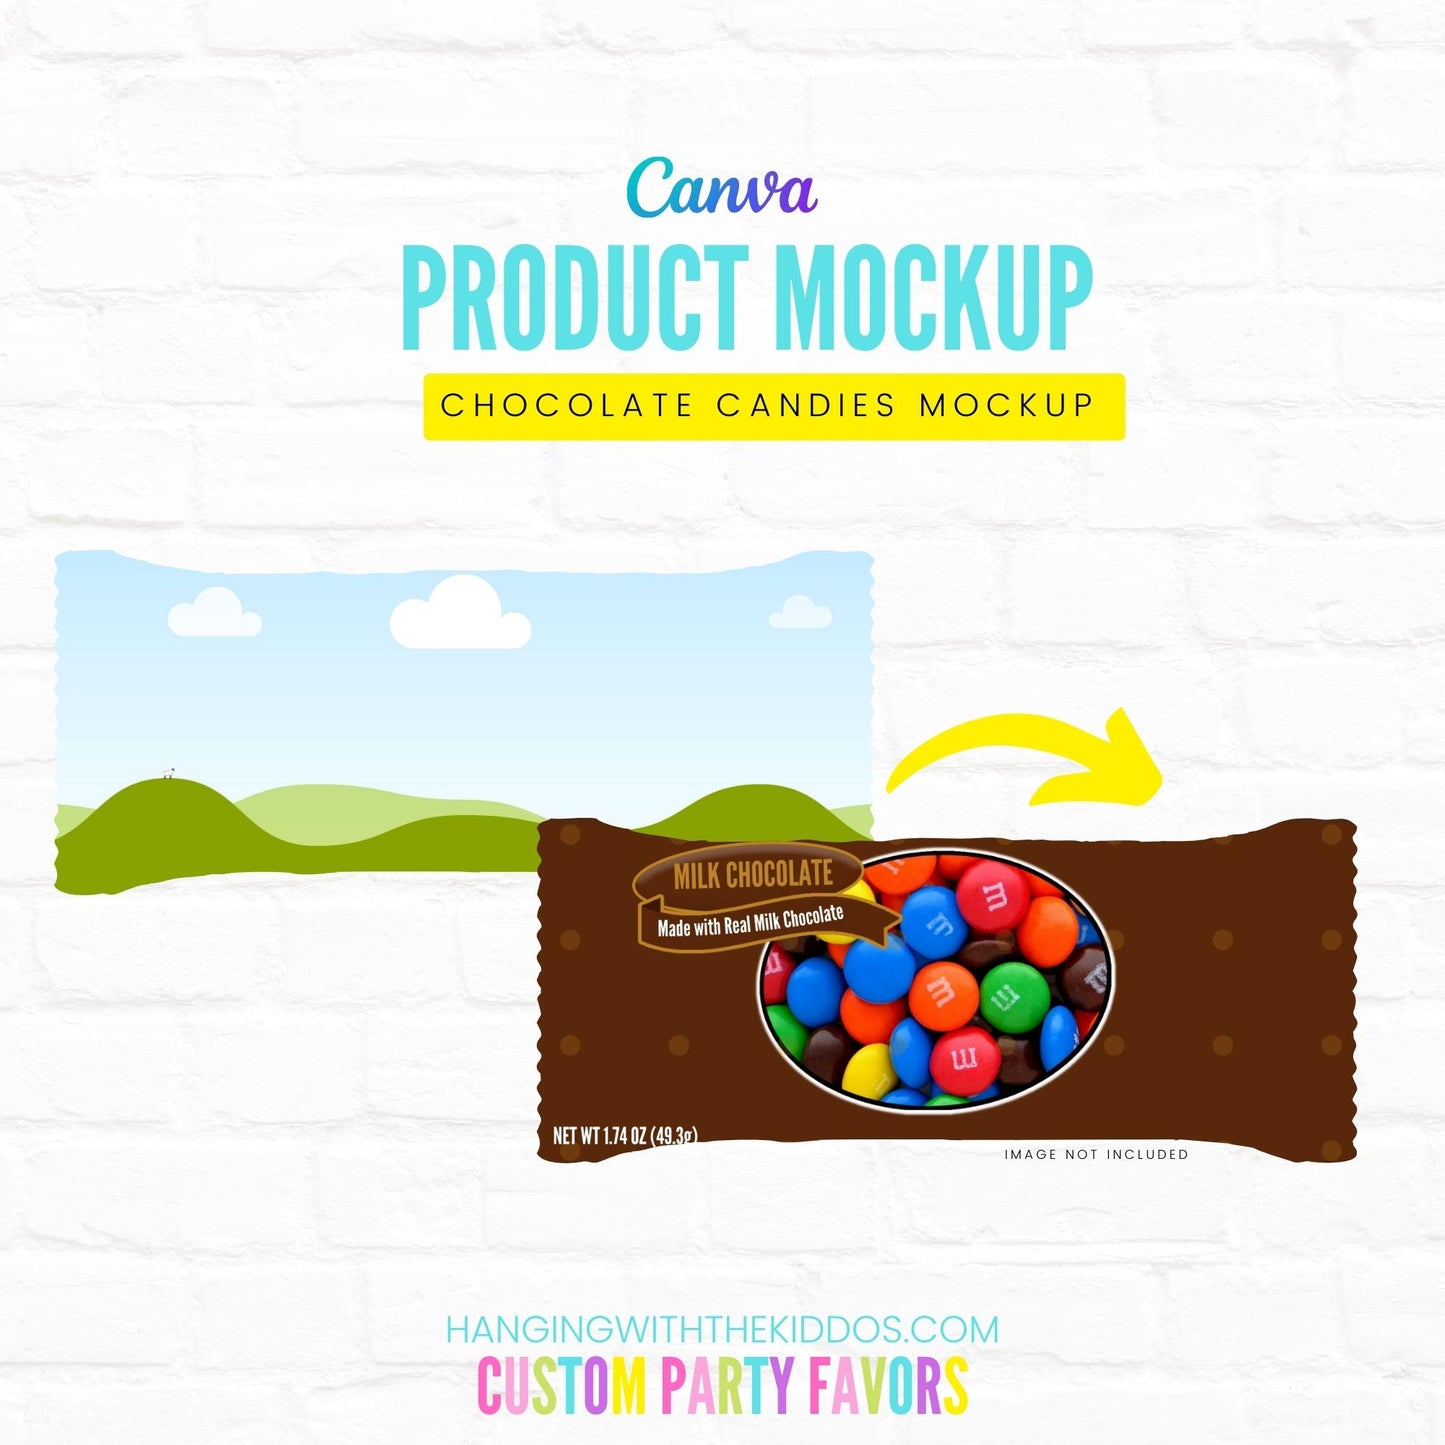 Chocolate Candies Mockup|Canva Template